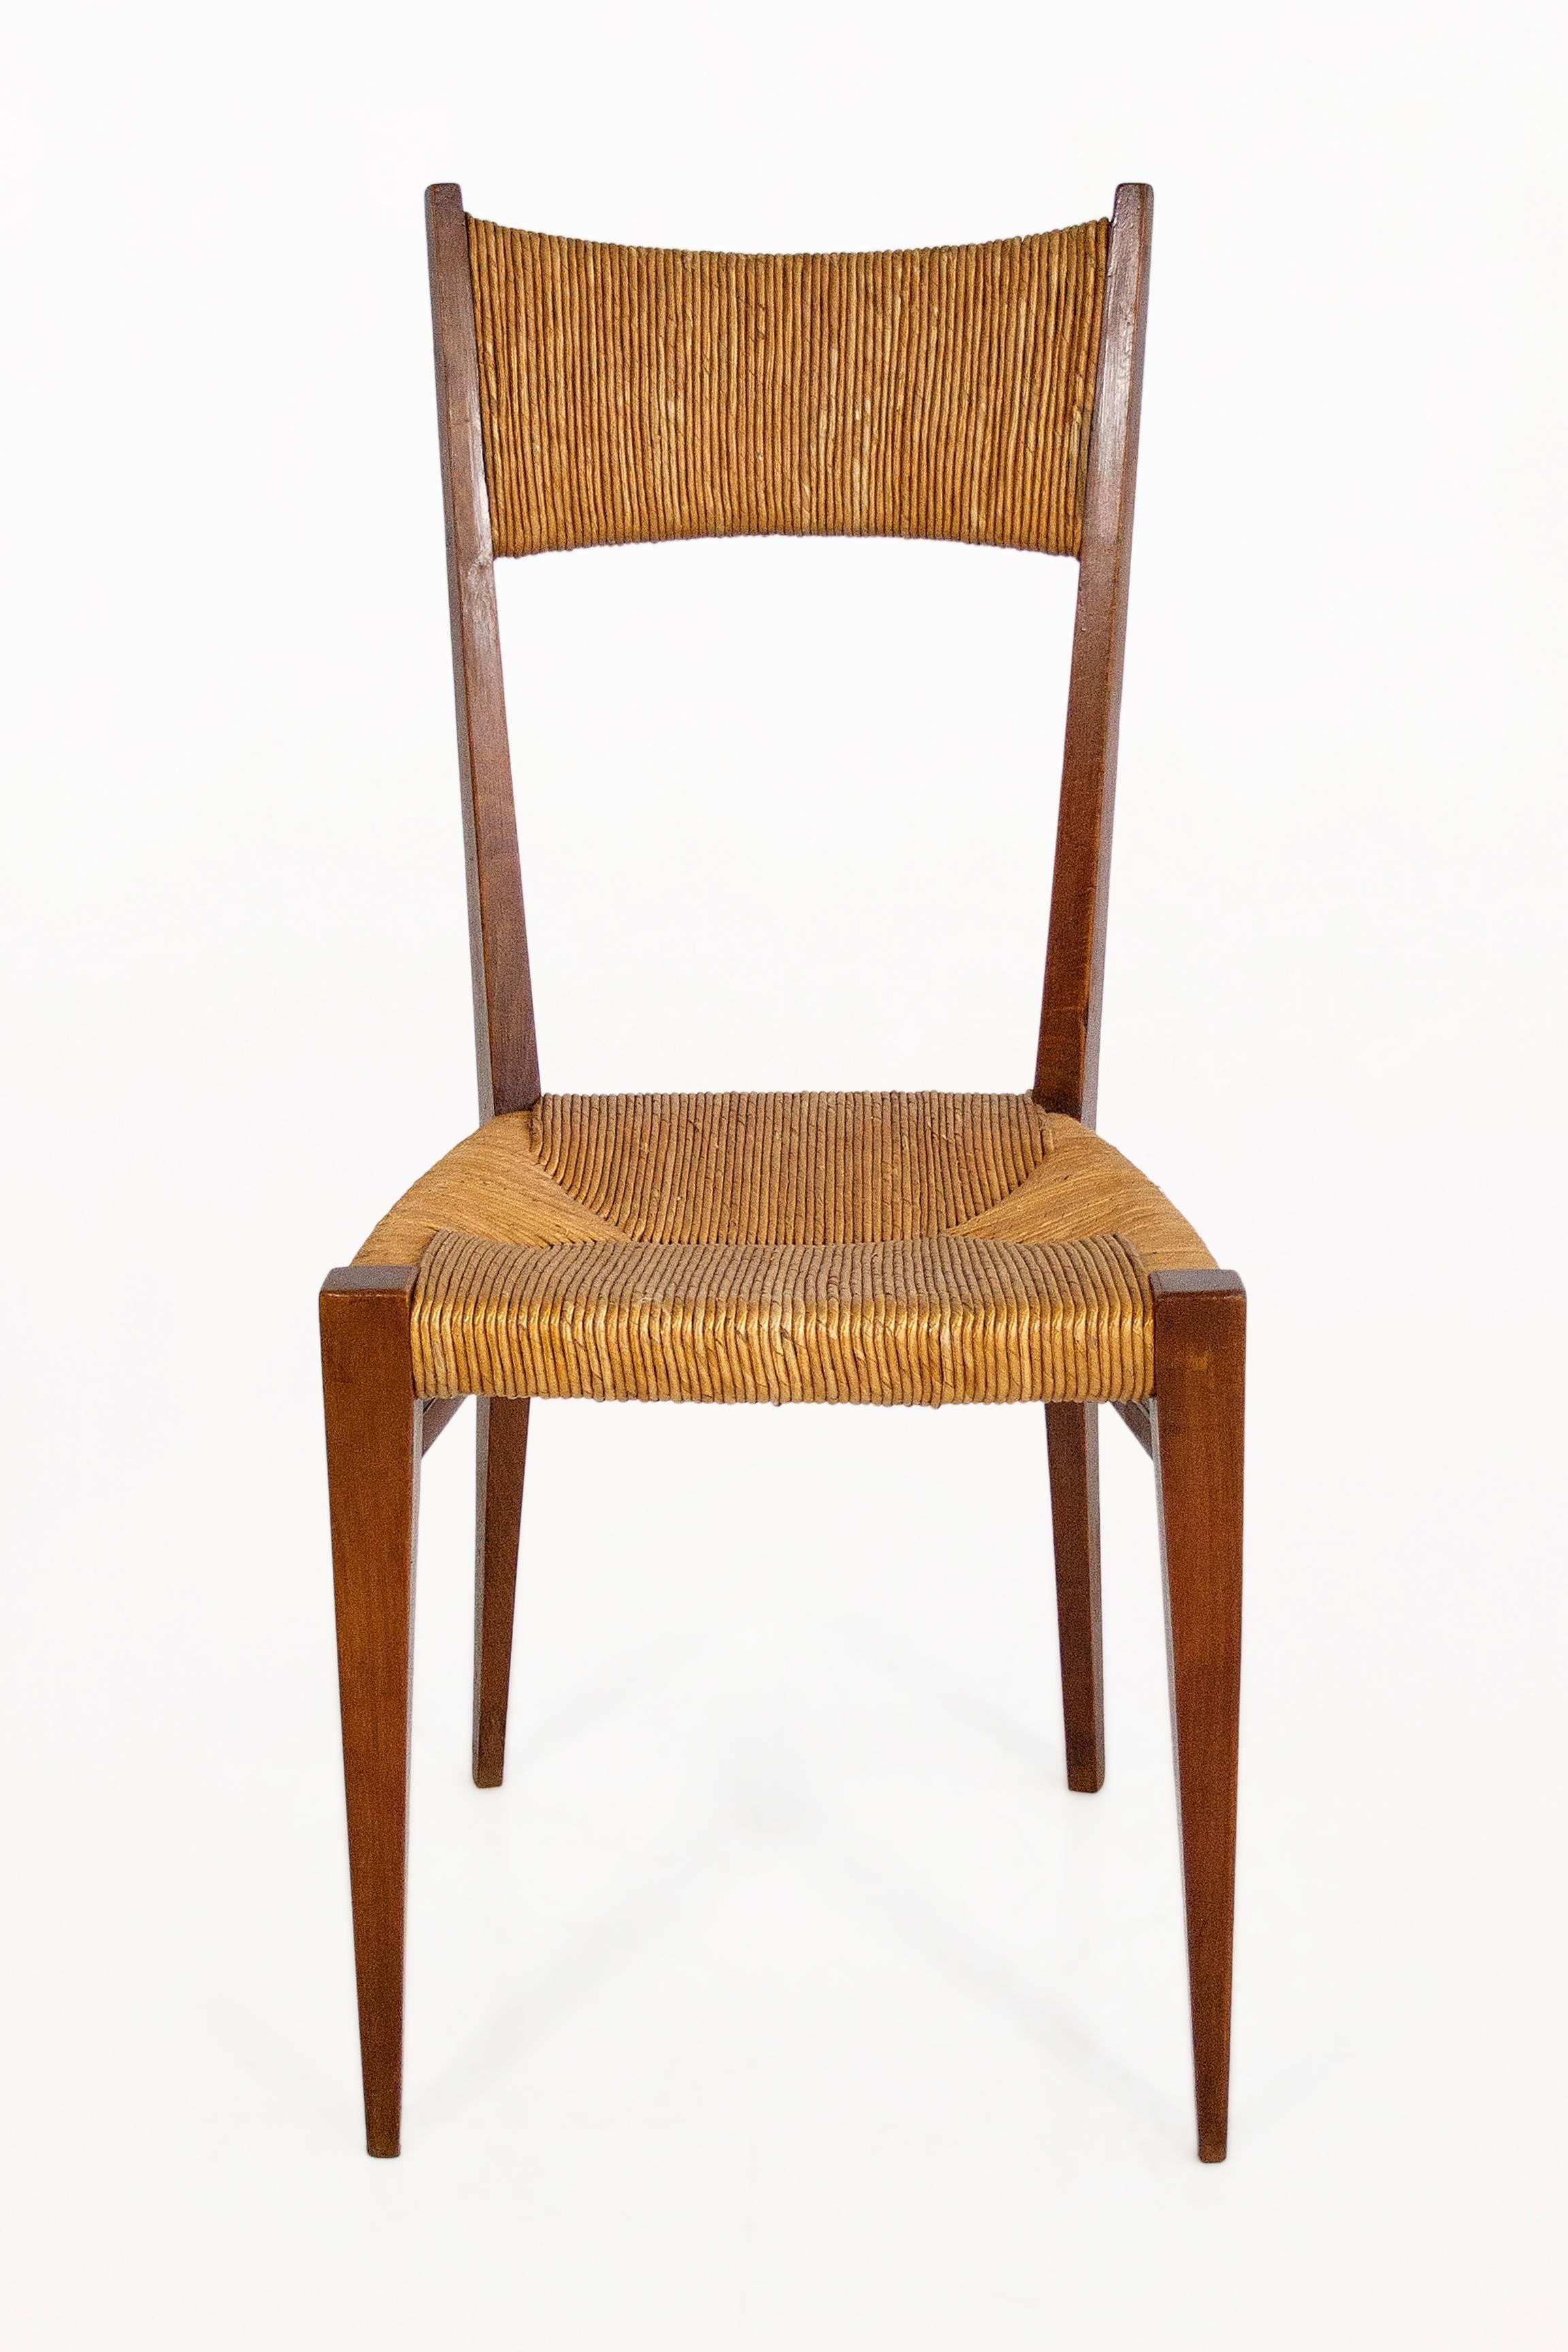 Set of four brown dining chairs
Very light and comfortable
circa 1950, France
Very good vintage condition.